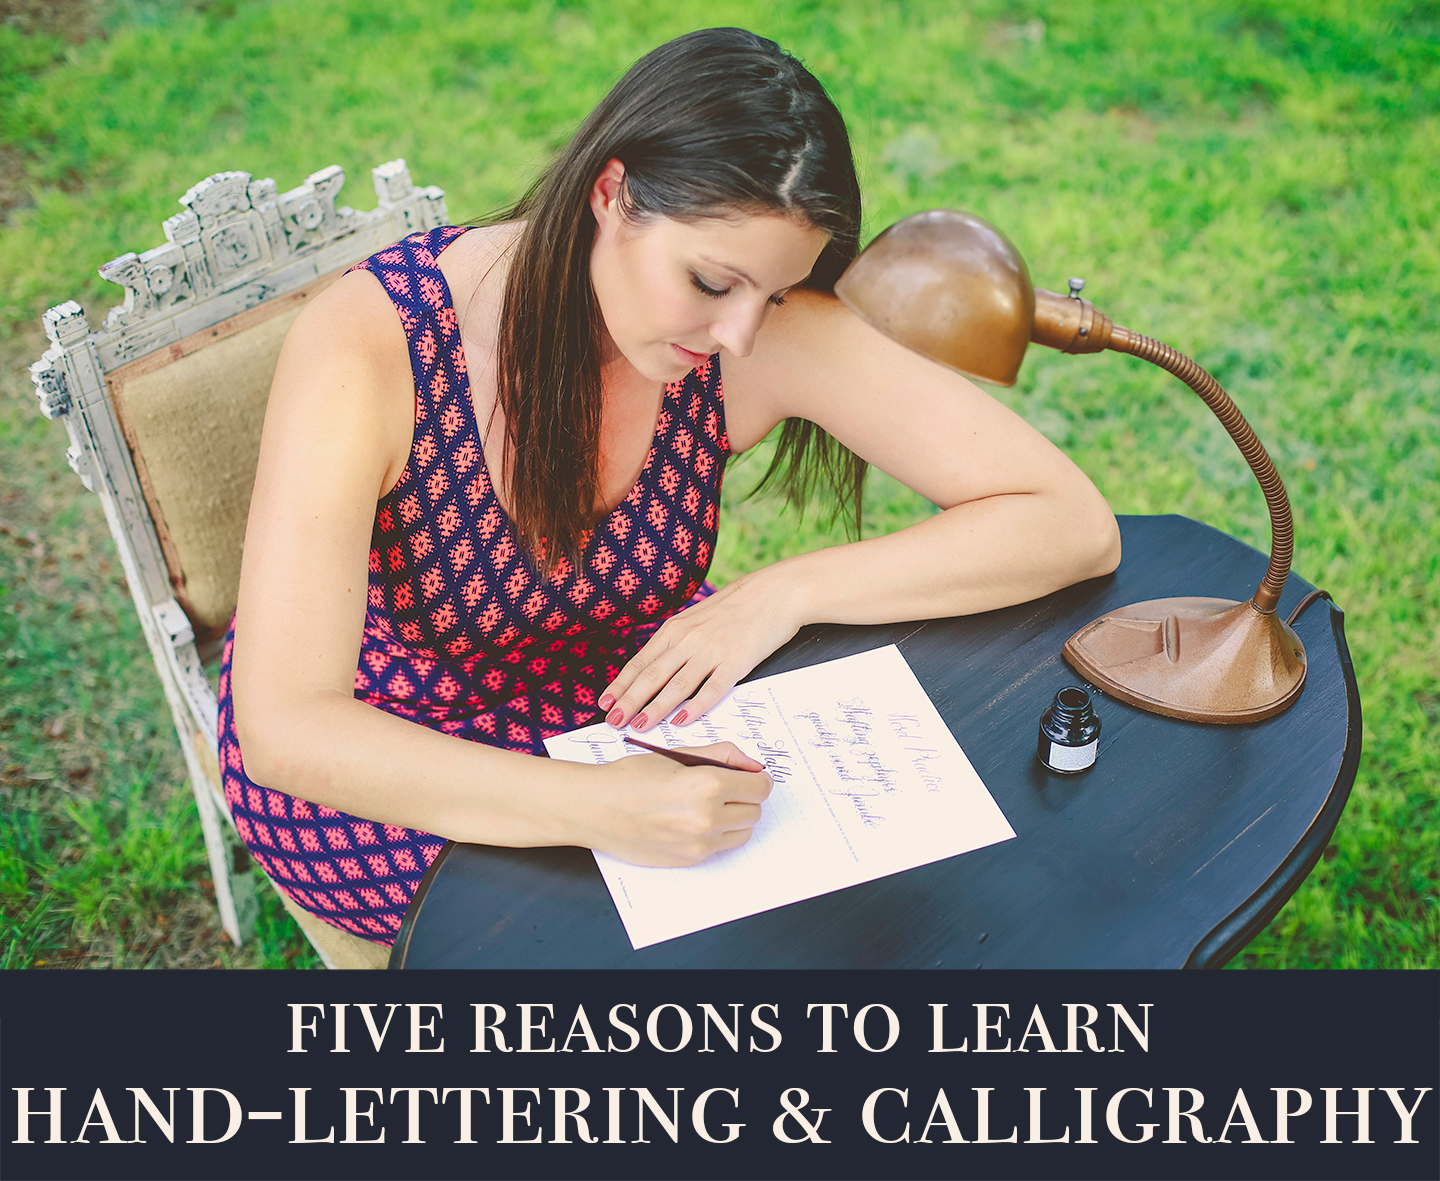 5 Reasons to Learn Hand-Lettering and Calligraphy